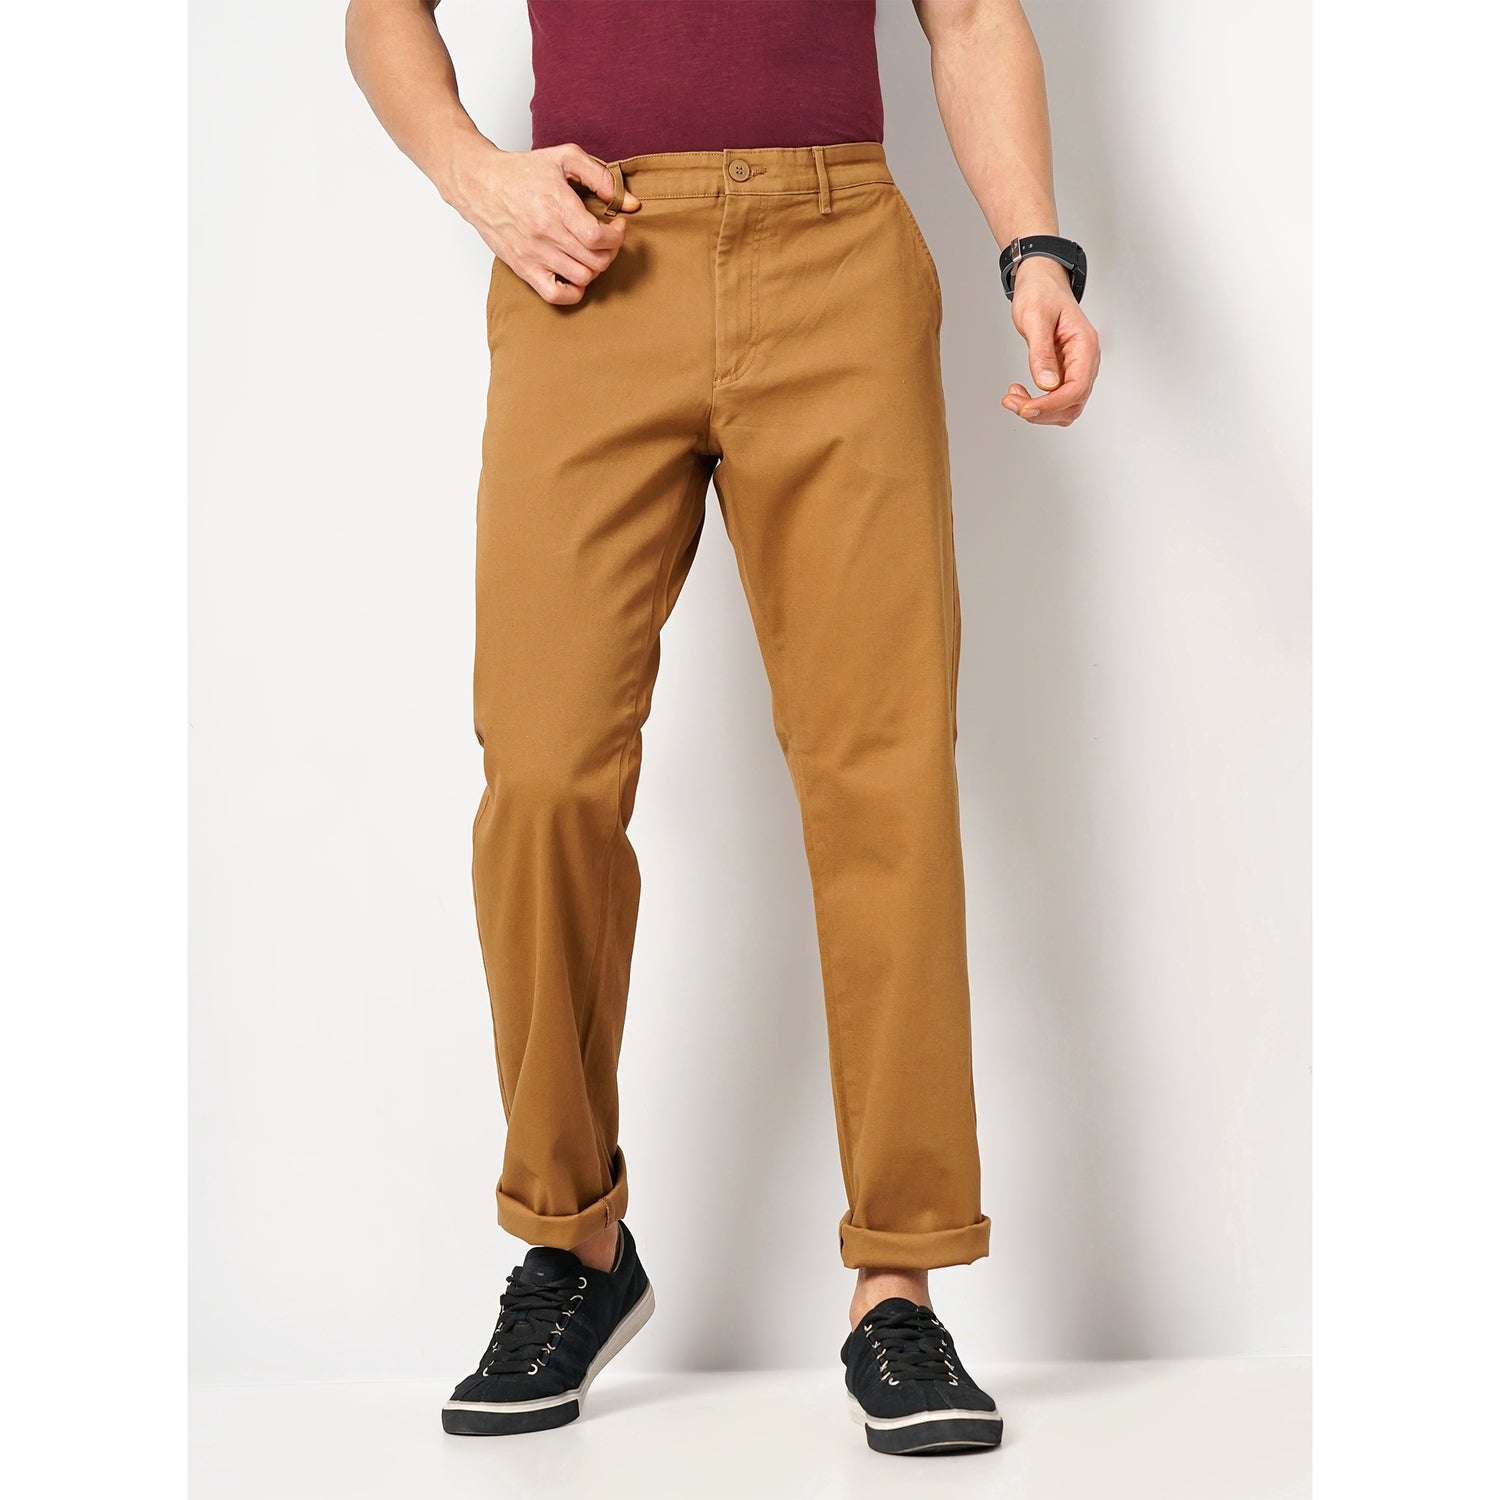 Men's Brown Solid Straight Fit Cotton Chino Casual Trouser (TOHENRI1)